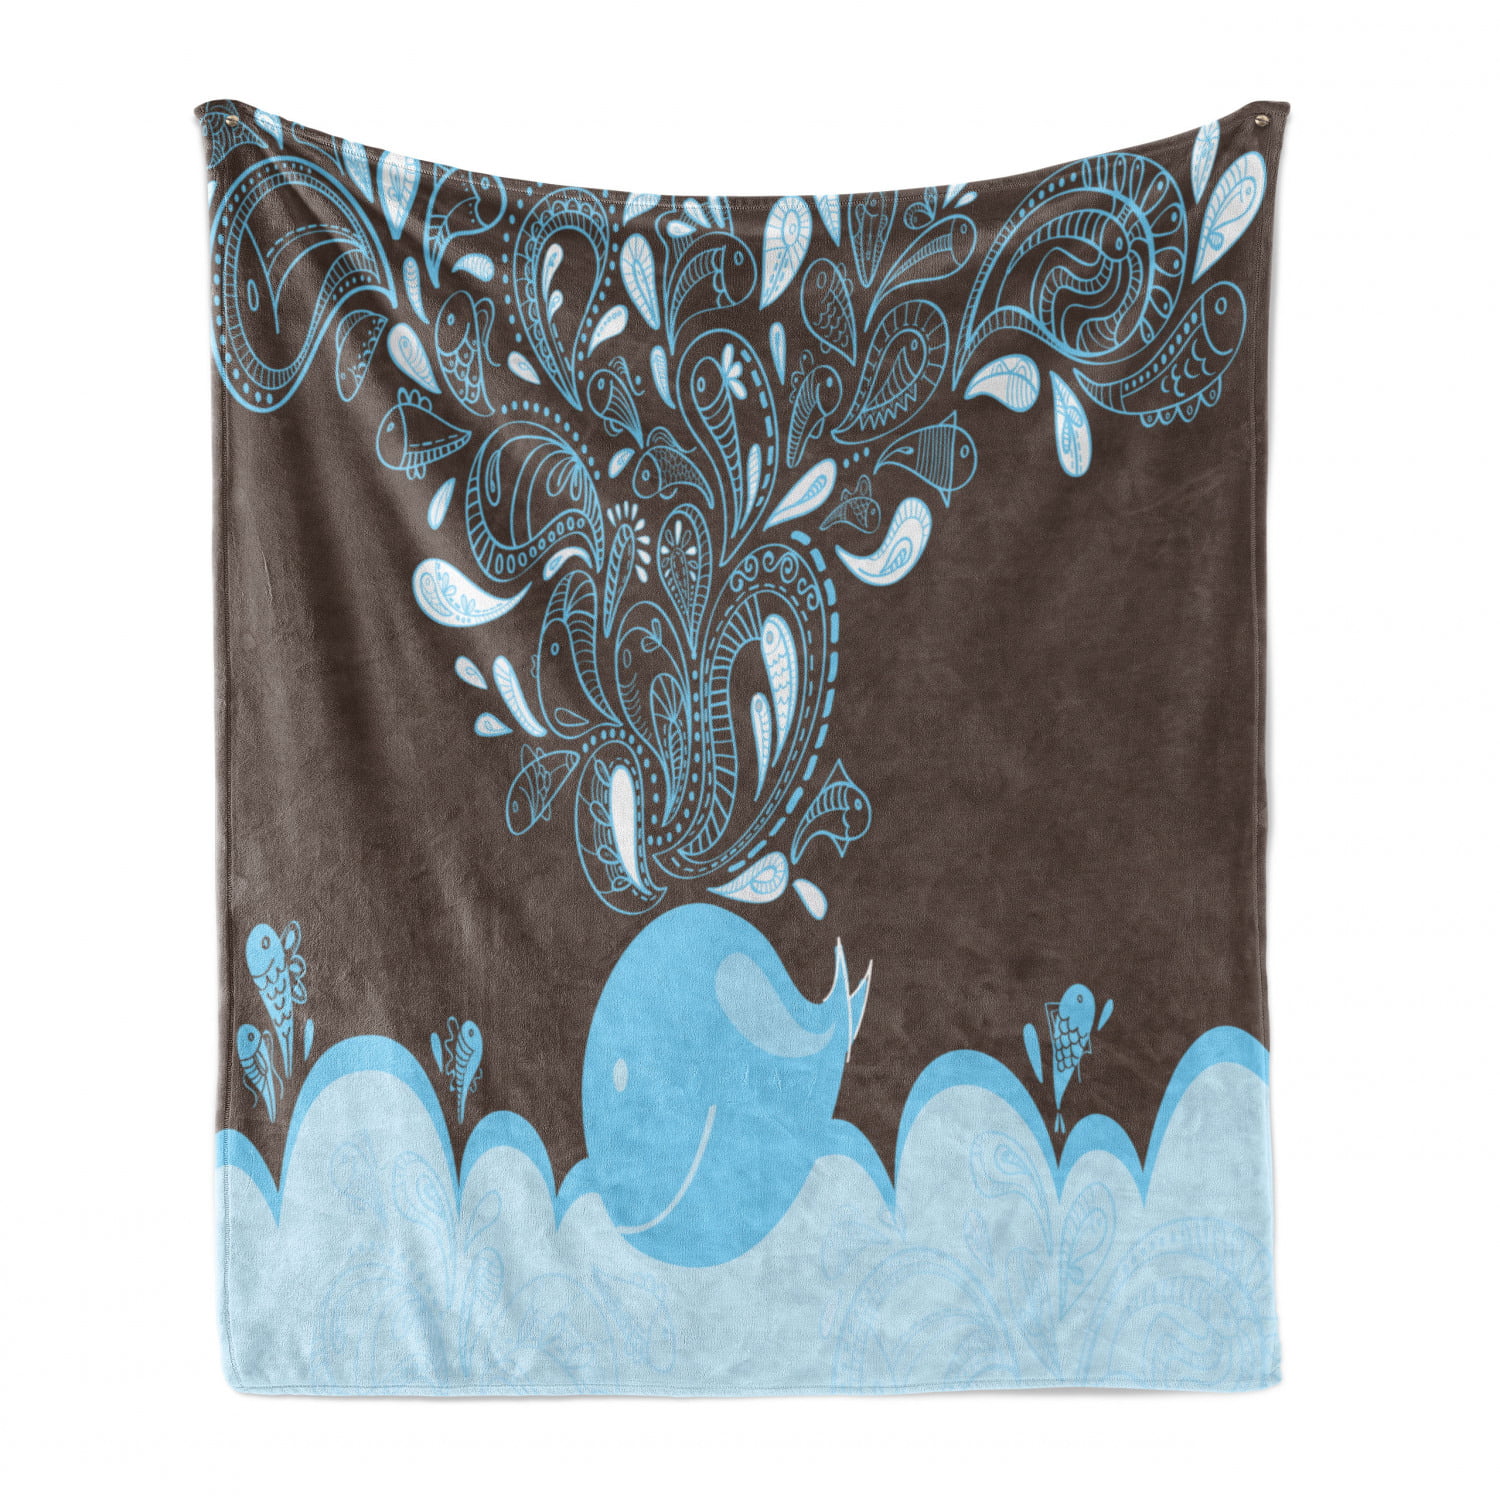 Cozy Plush for Indoor and Outdoor Use Baloon Like Mammal in The Ocean Bubbles Cartoon Batik Tribal Style Image Blue and Brown 70 x 90 Ambesonne Whale Soft Flannel Fleece Throw Blanket 